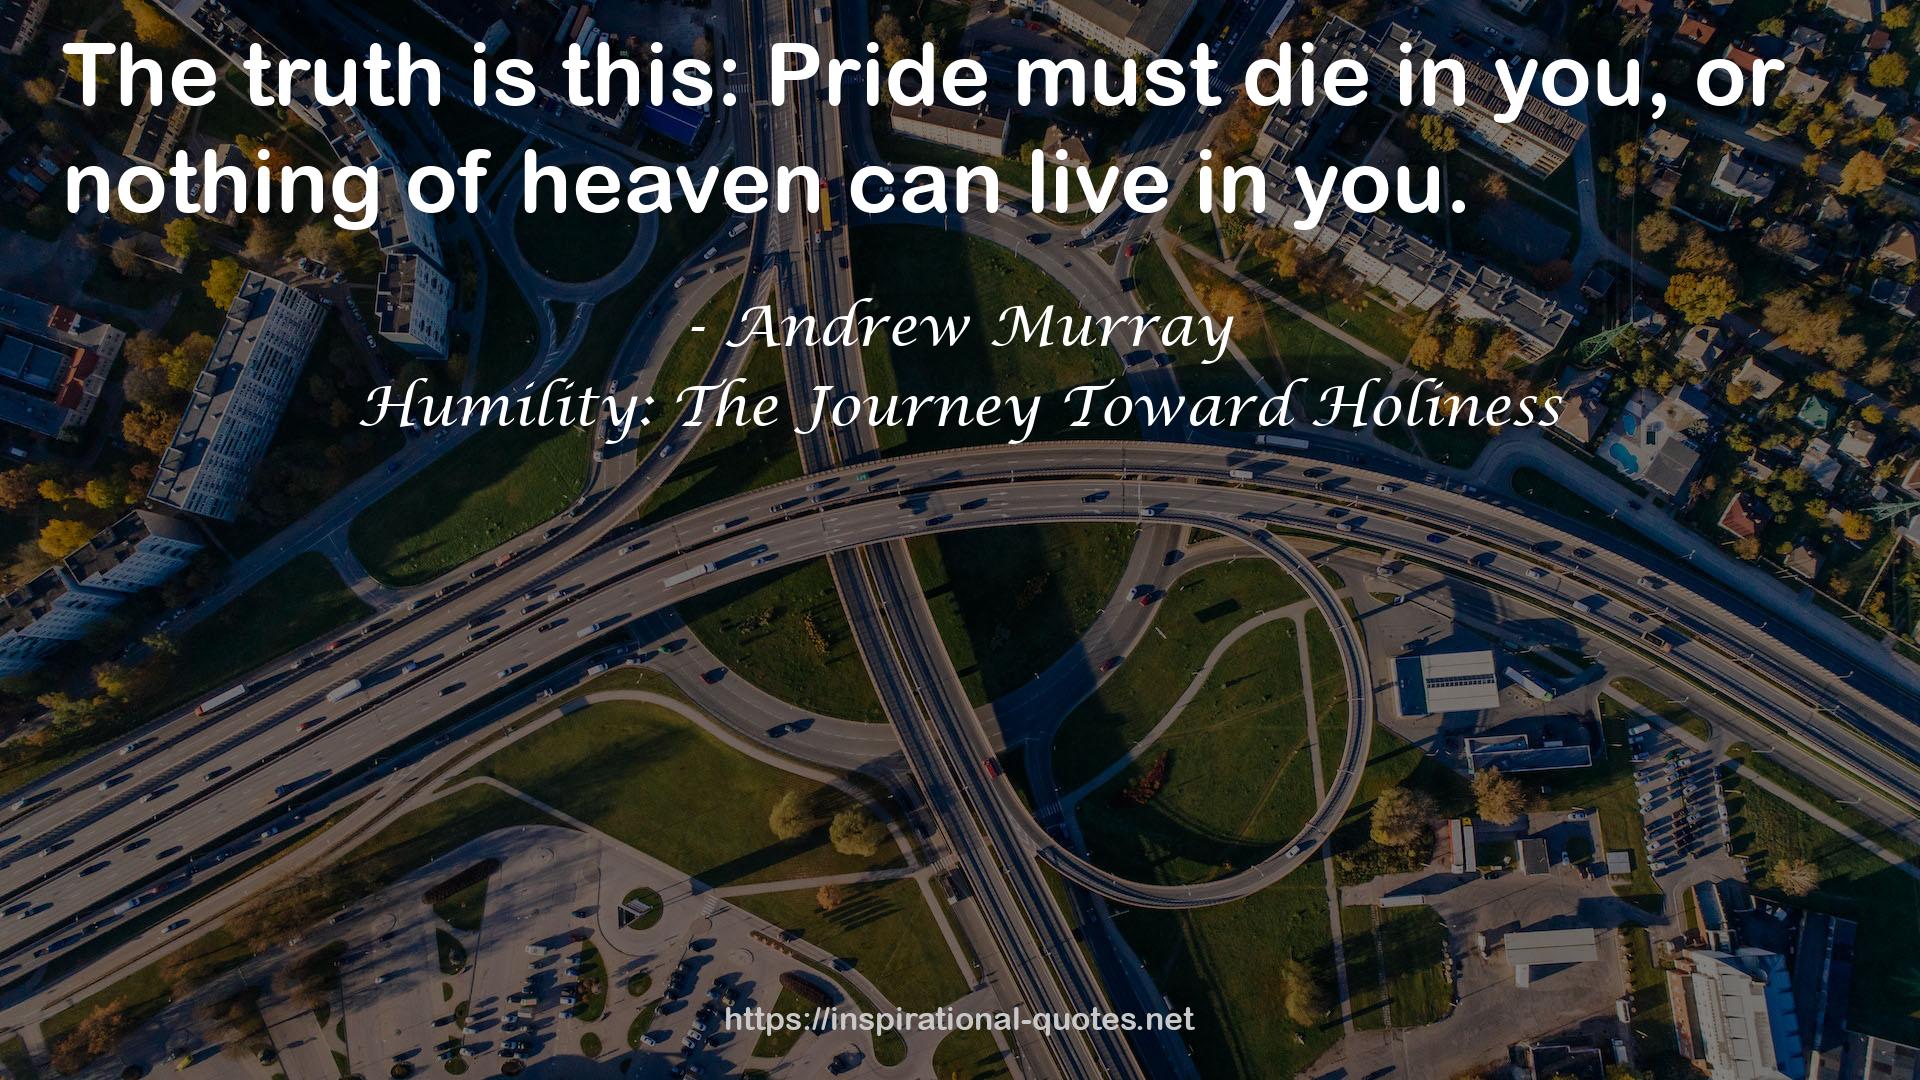 Humility: The Journey Toward Holiness QUOTES